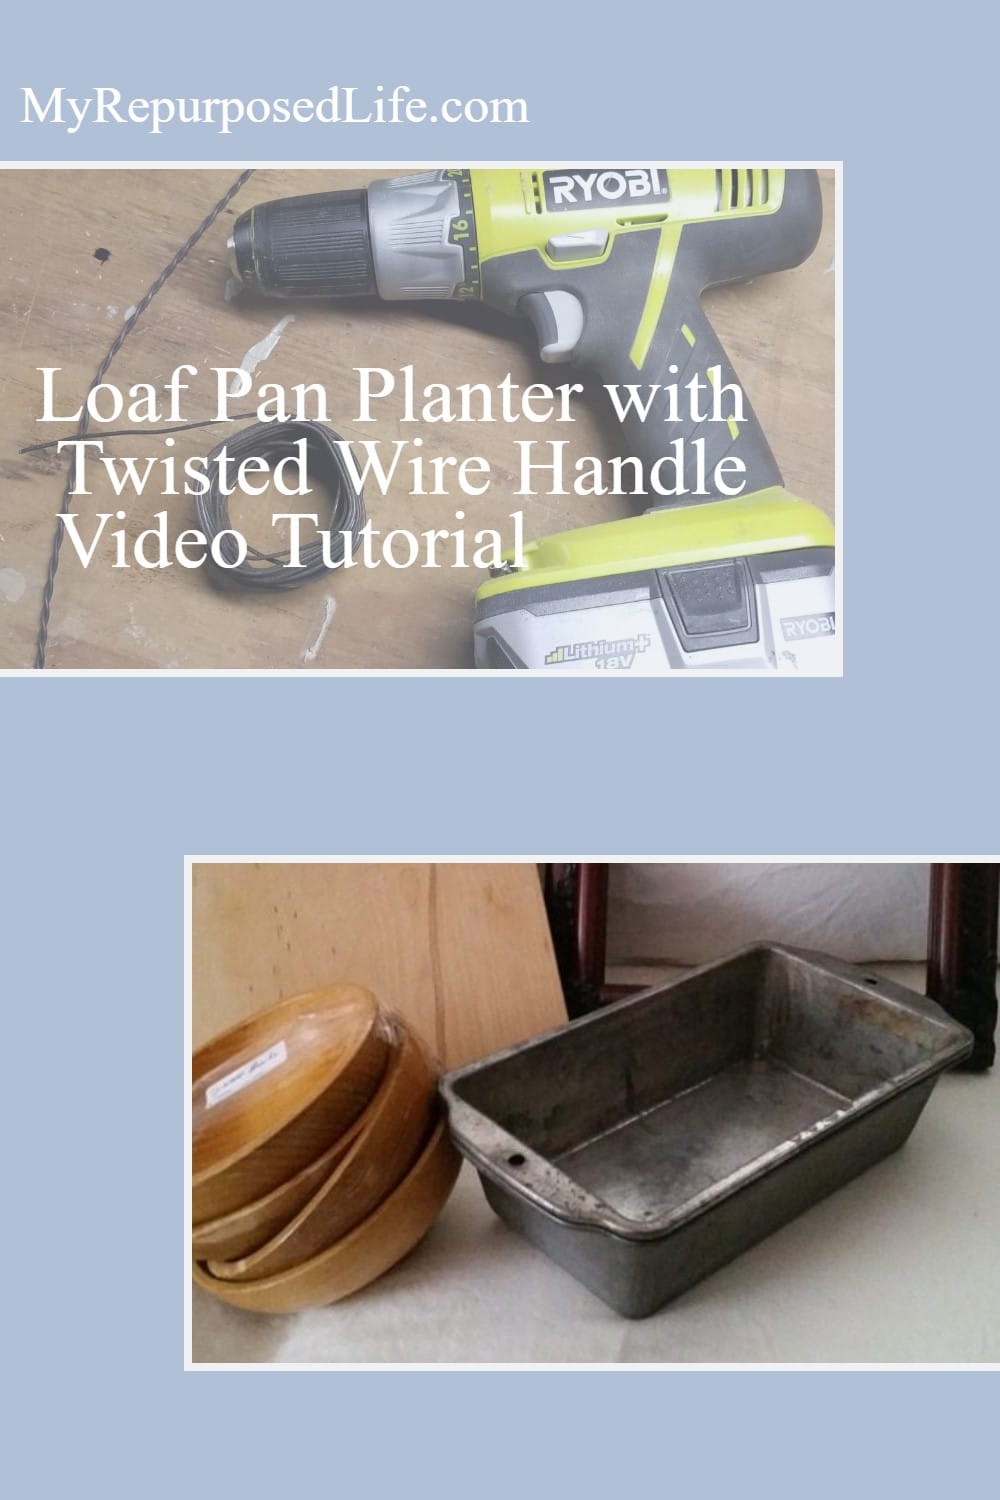 How to make a loaf pan planter for succulents and add a twisted wire handle. Tips on making a twisted wire handle with your cordless drill. Video tutorial for wire handle and picture tutorial for loaf pan planter. This can up your game on many projects #MyRepurposedLife #repurposed #loaf #pan #planter via @repurposedlife